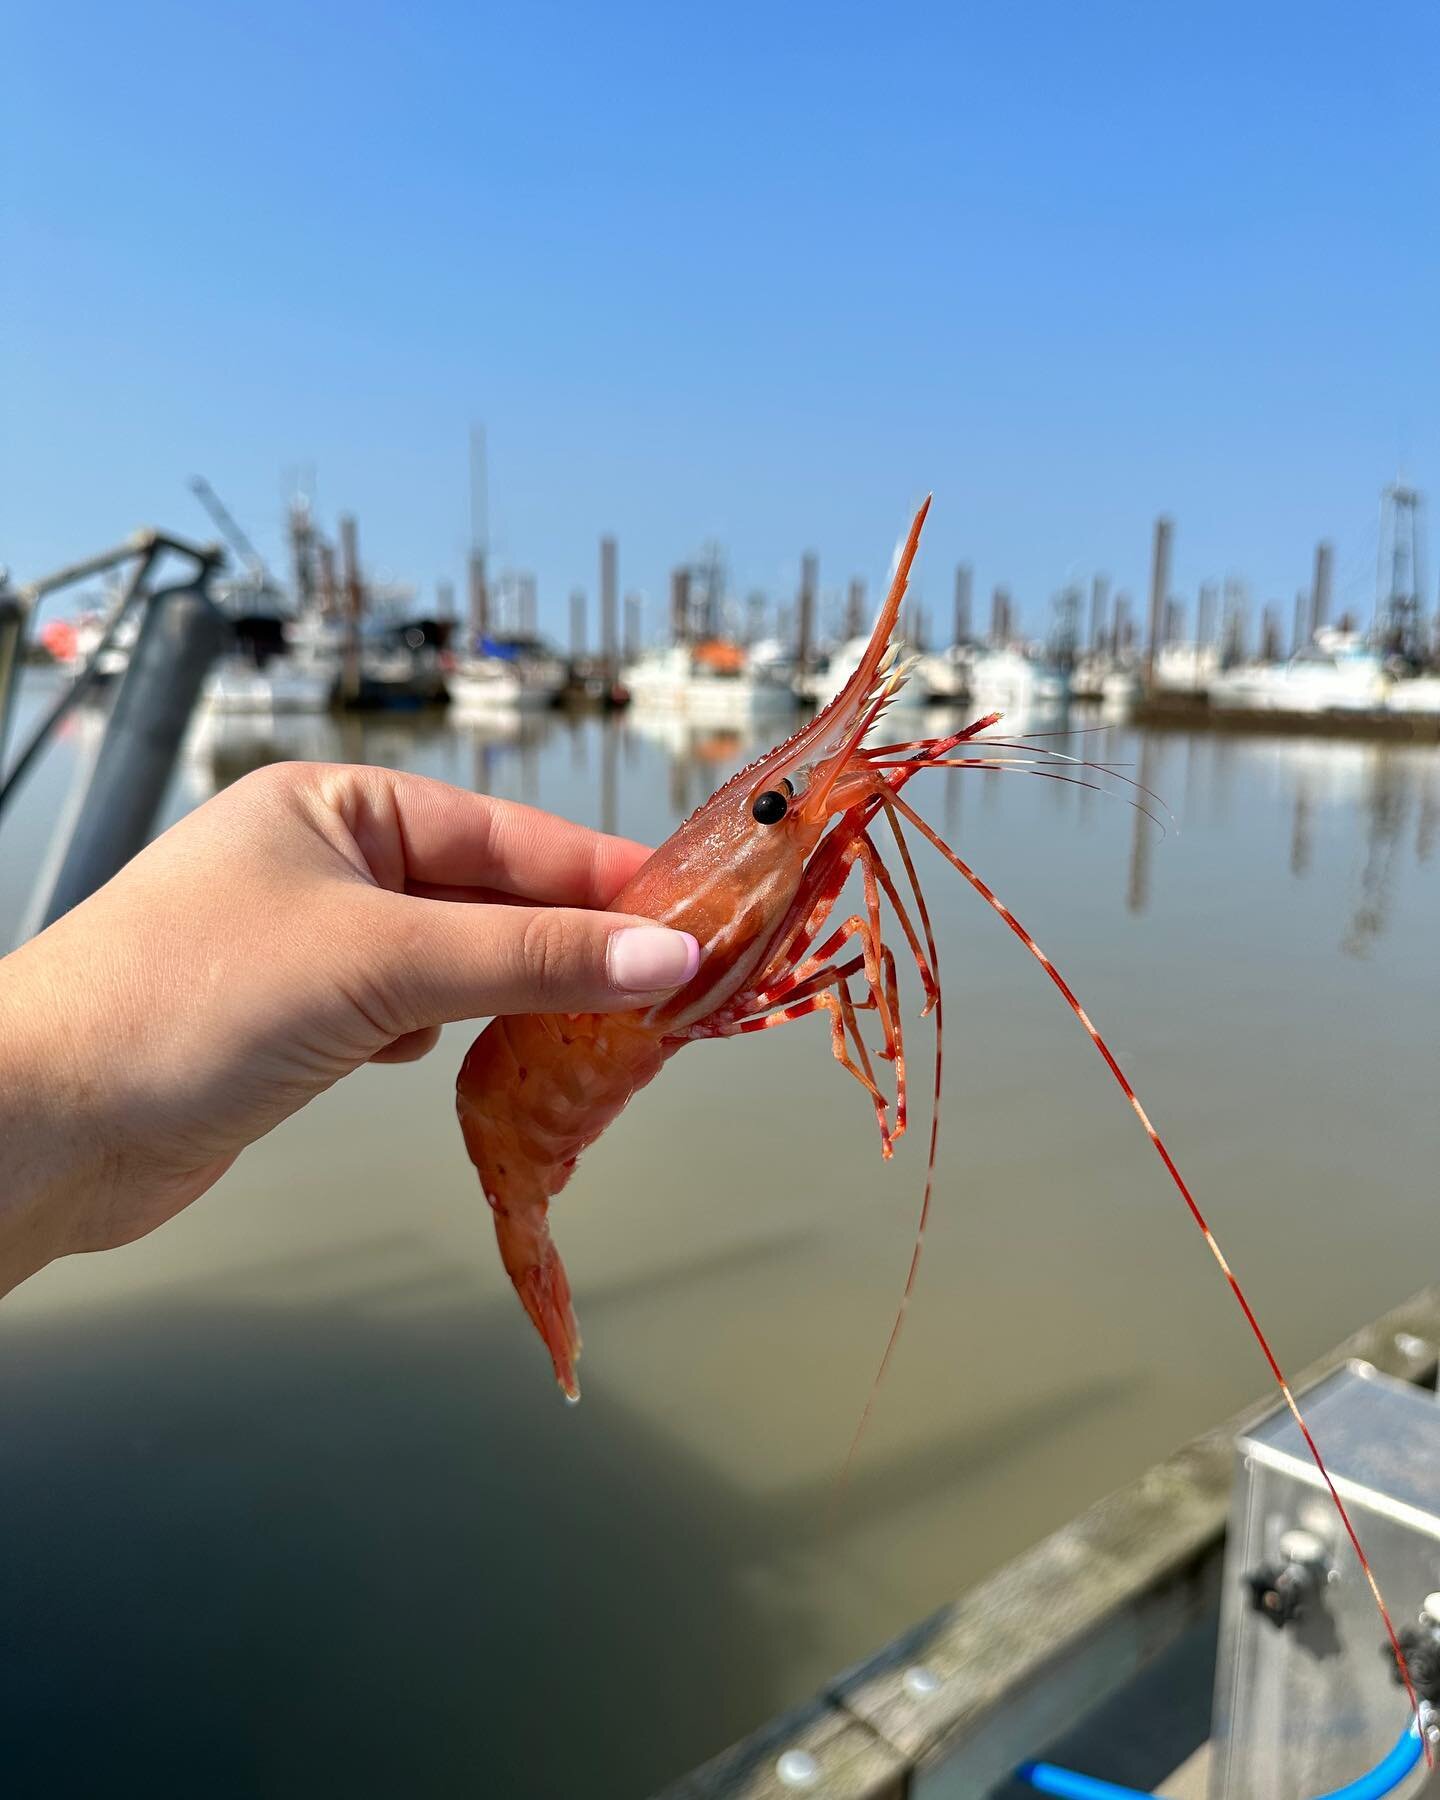 We are OPEN 🦐🦐🦐 It&rsquo;s a beautiful day to kick off #BCSpotPrawns dock sales in Steveston ☀️ come on down and say hi, it&rsquo;s been too long!